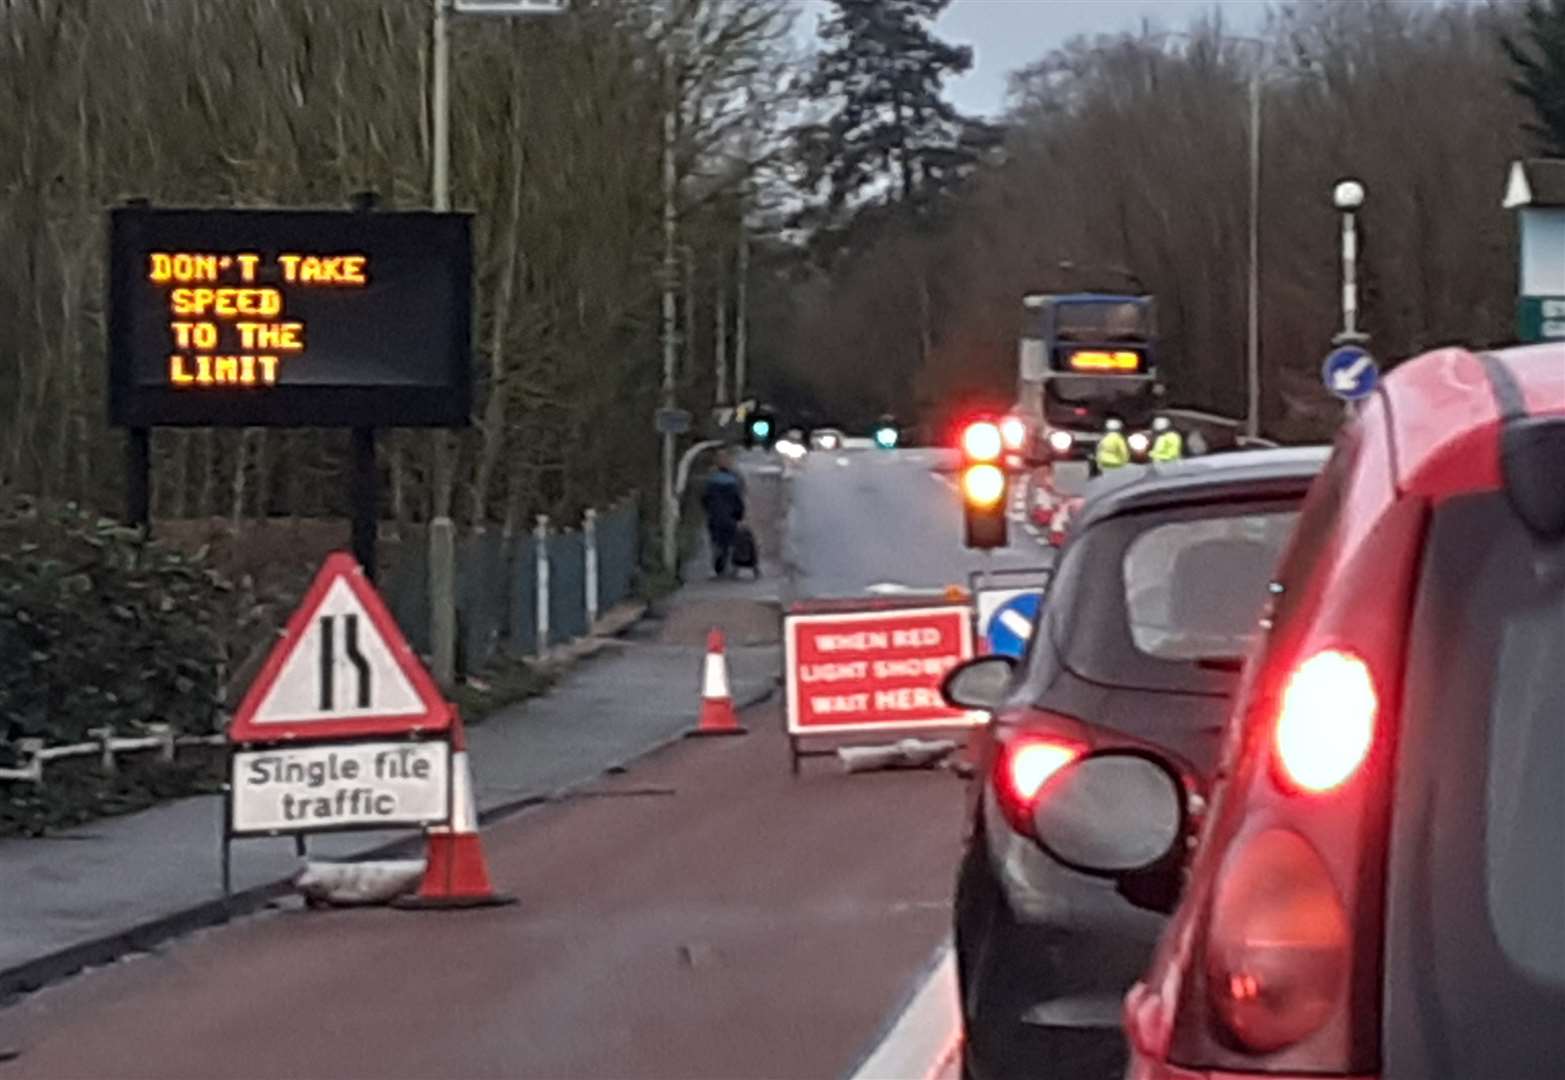 The lights have been installed next to a 'don't take speed to the limit' sign